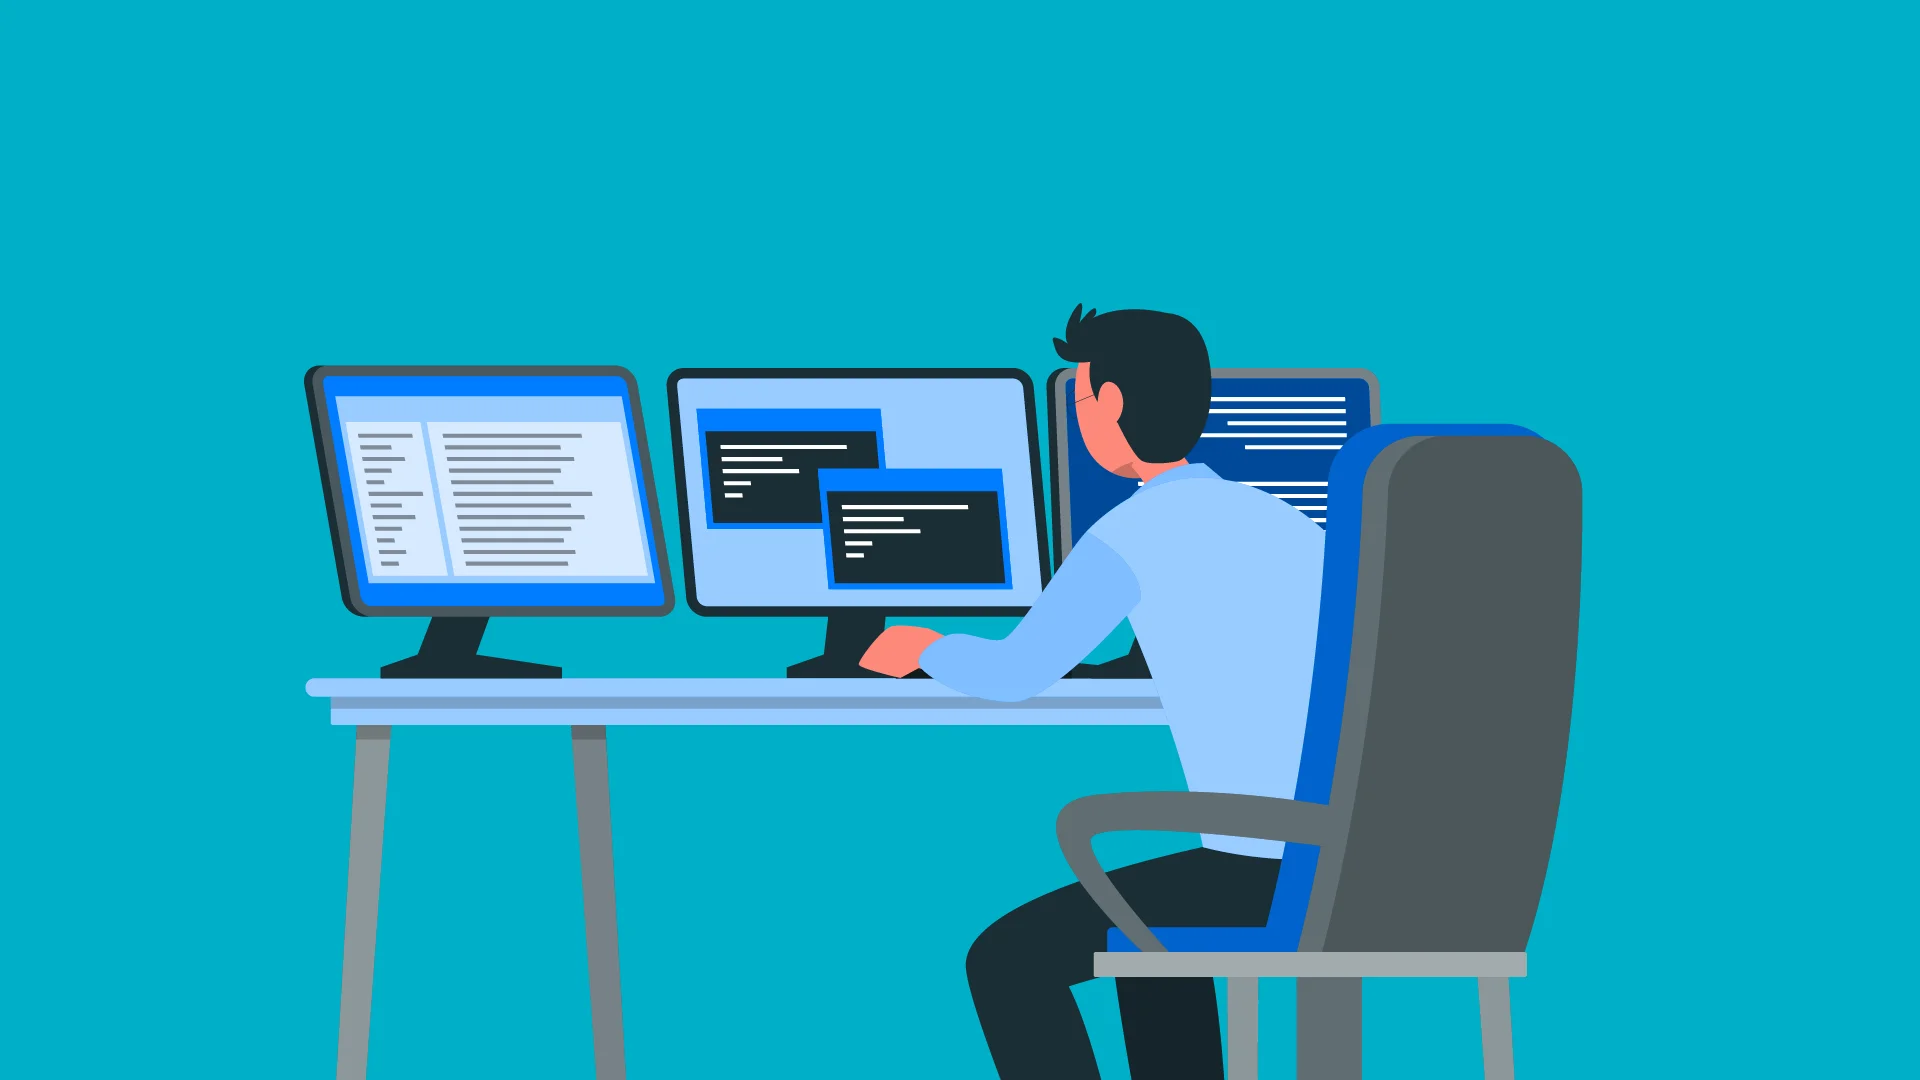 Learn How To Become An Effective Remote Developer With These Five Tips